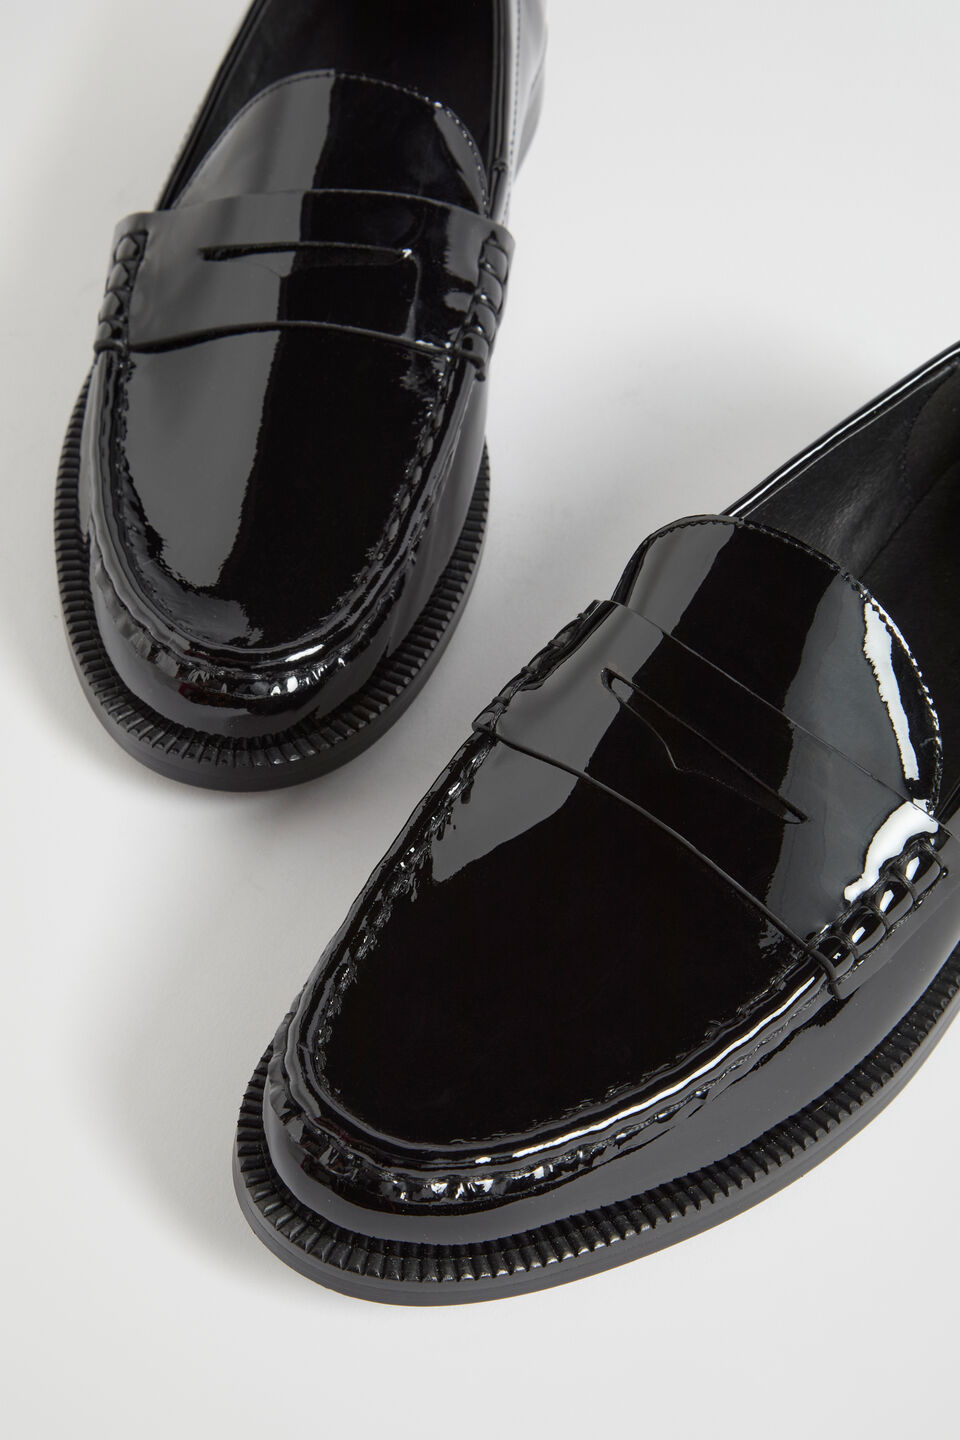 Kendall Loafer  Black Patent